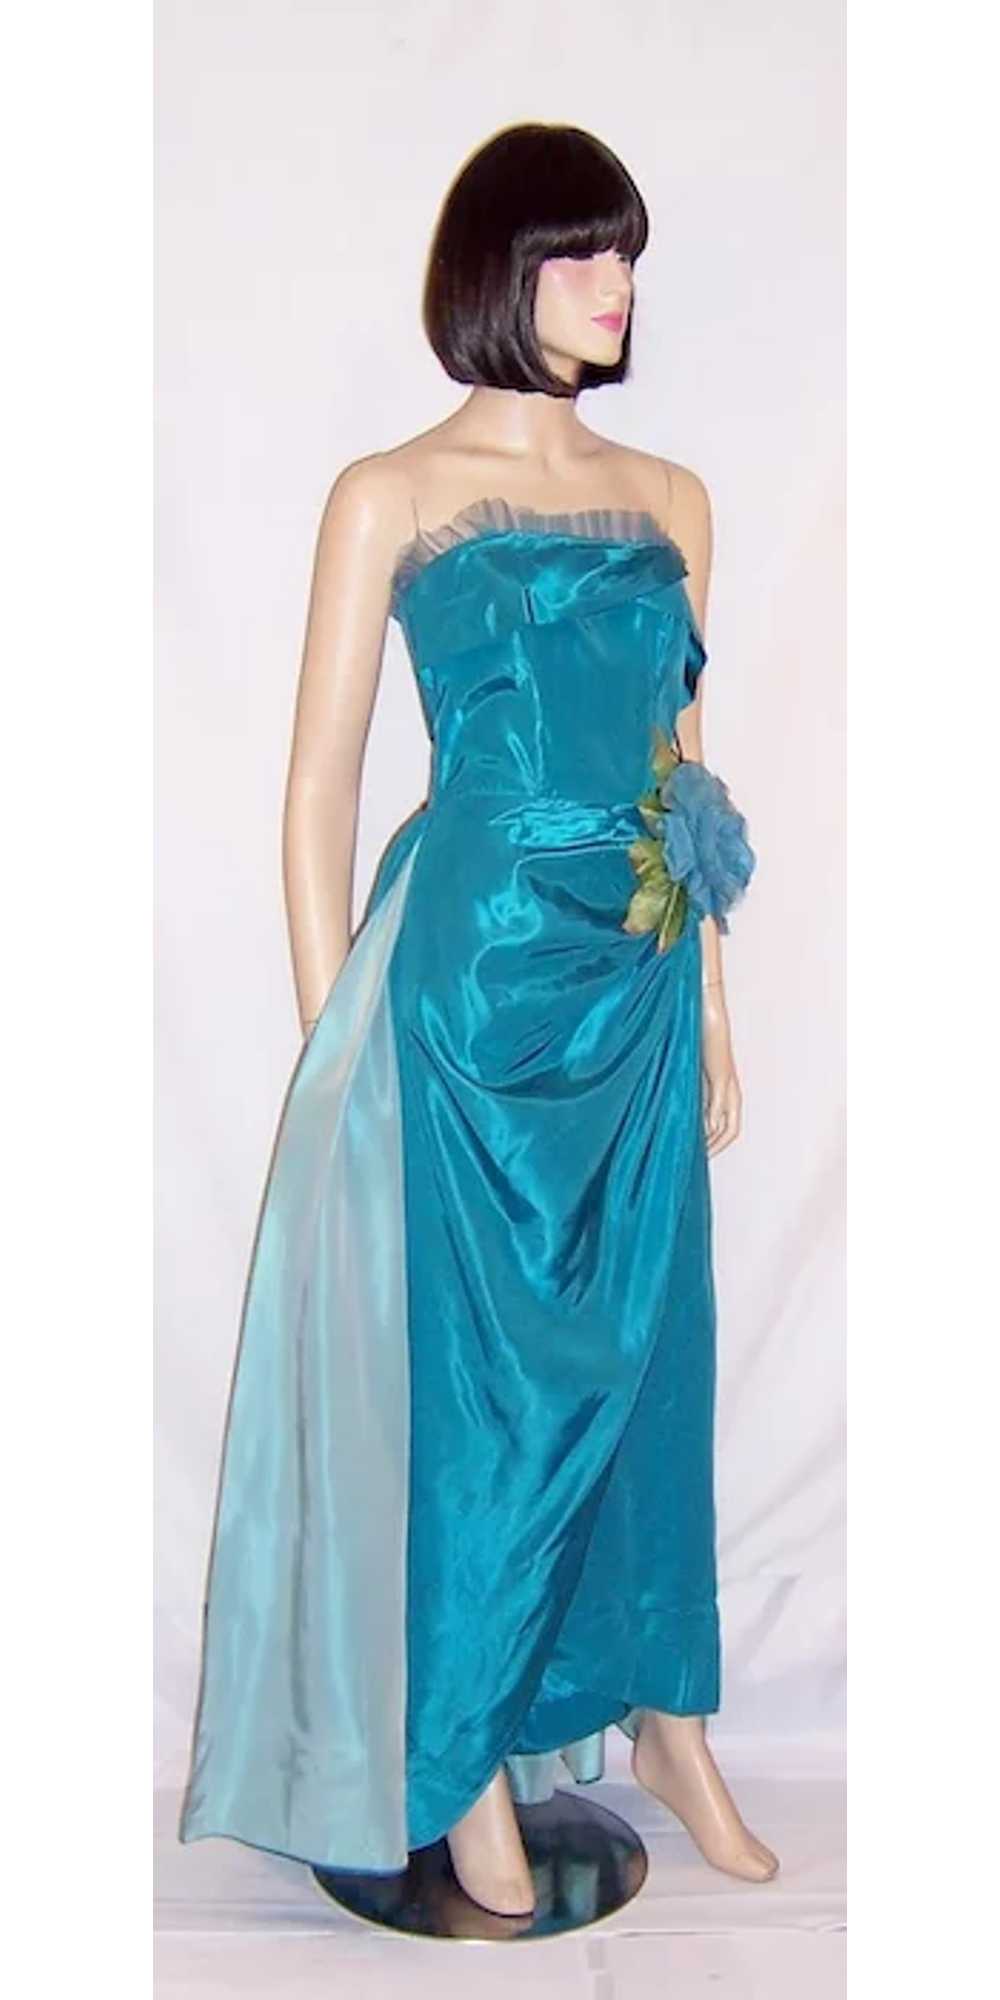 Two-Toned Turquoise Taffeta Strapless Gown - image 3